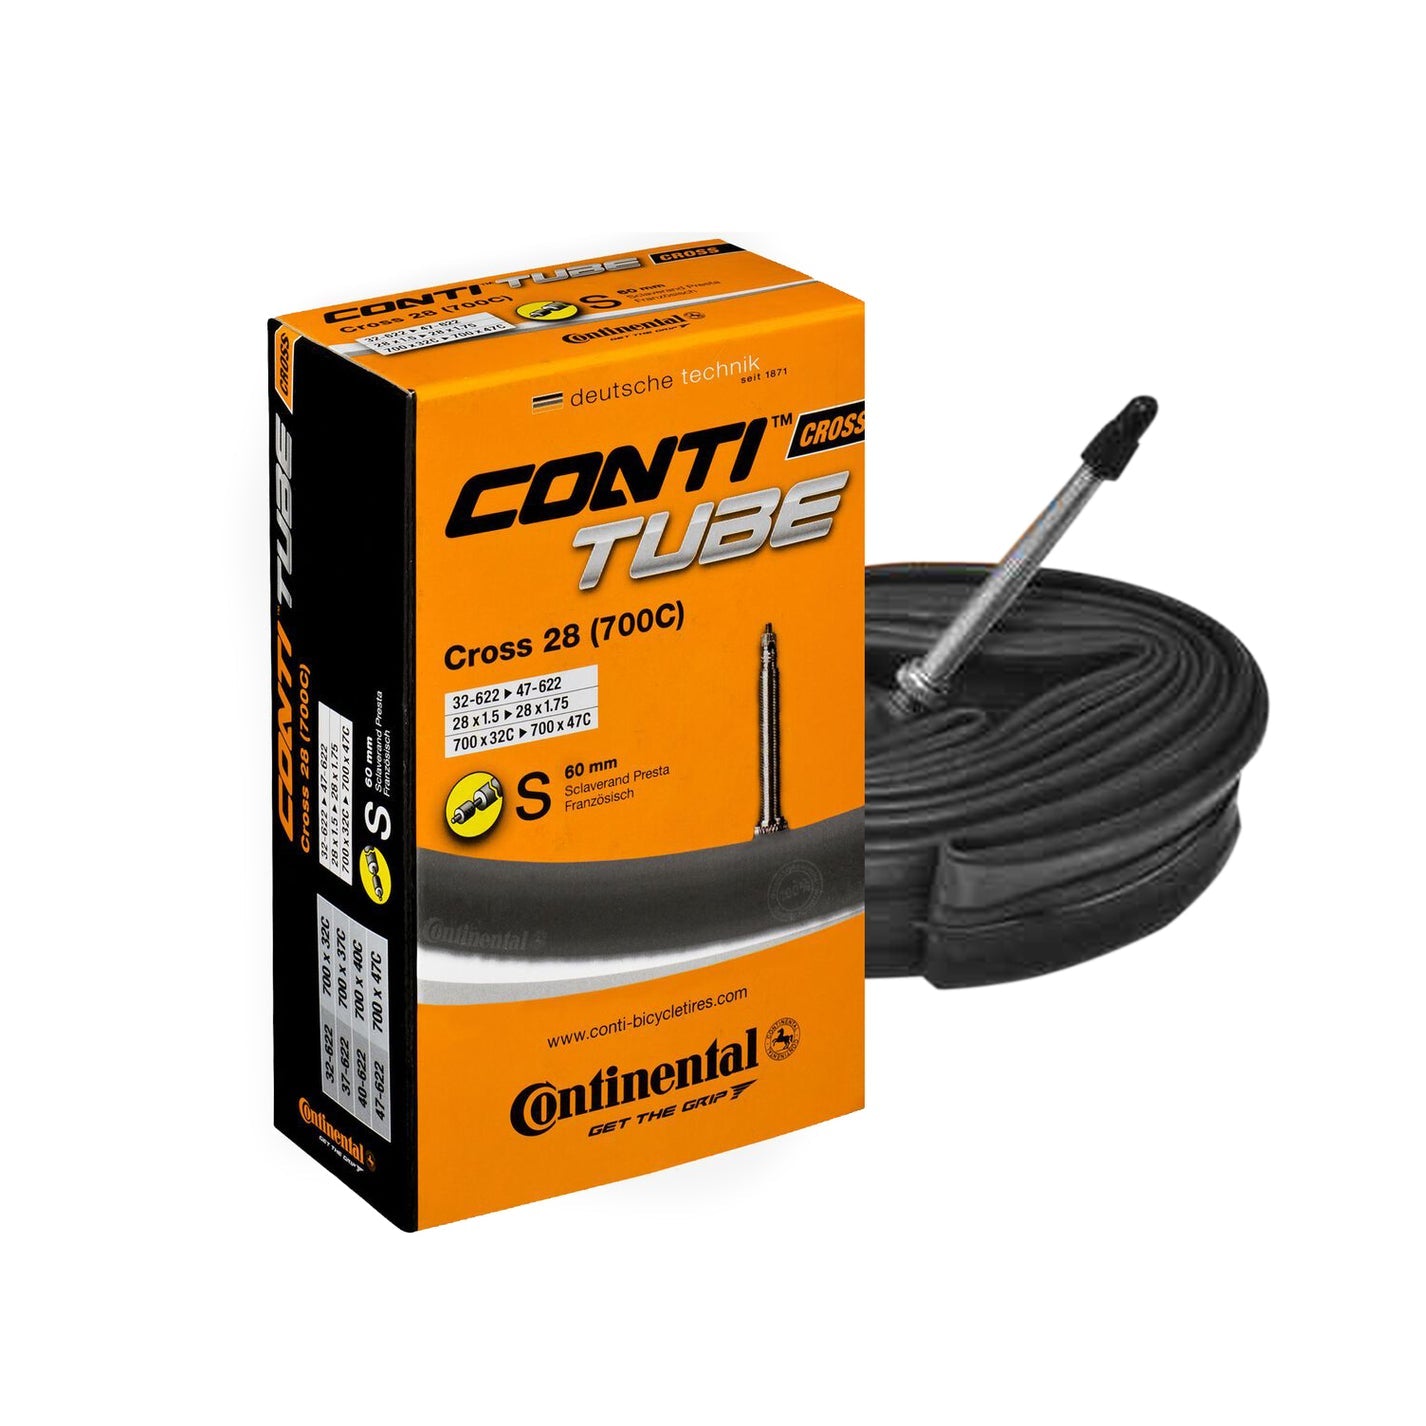 Continental Cross 28 Tubes